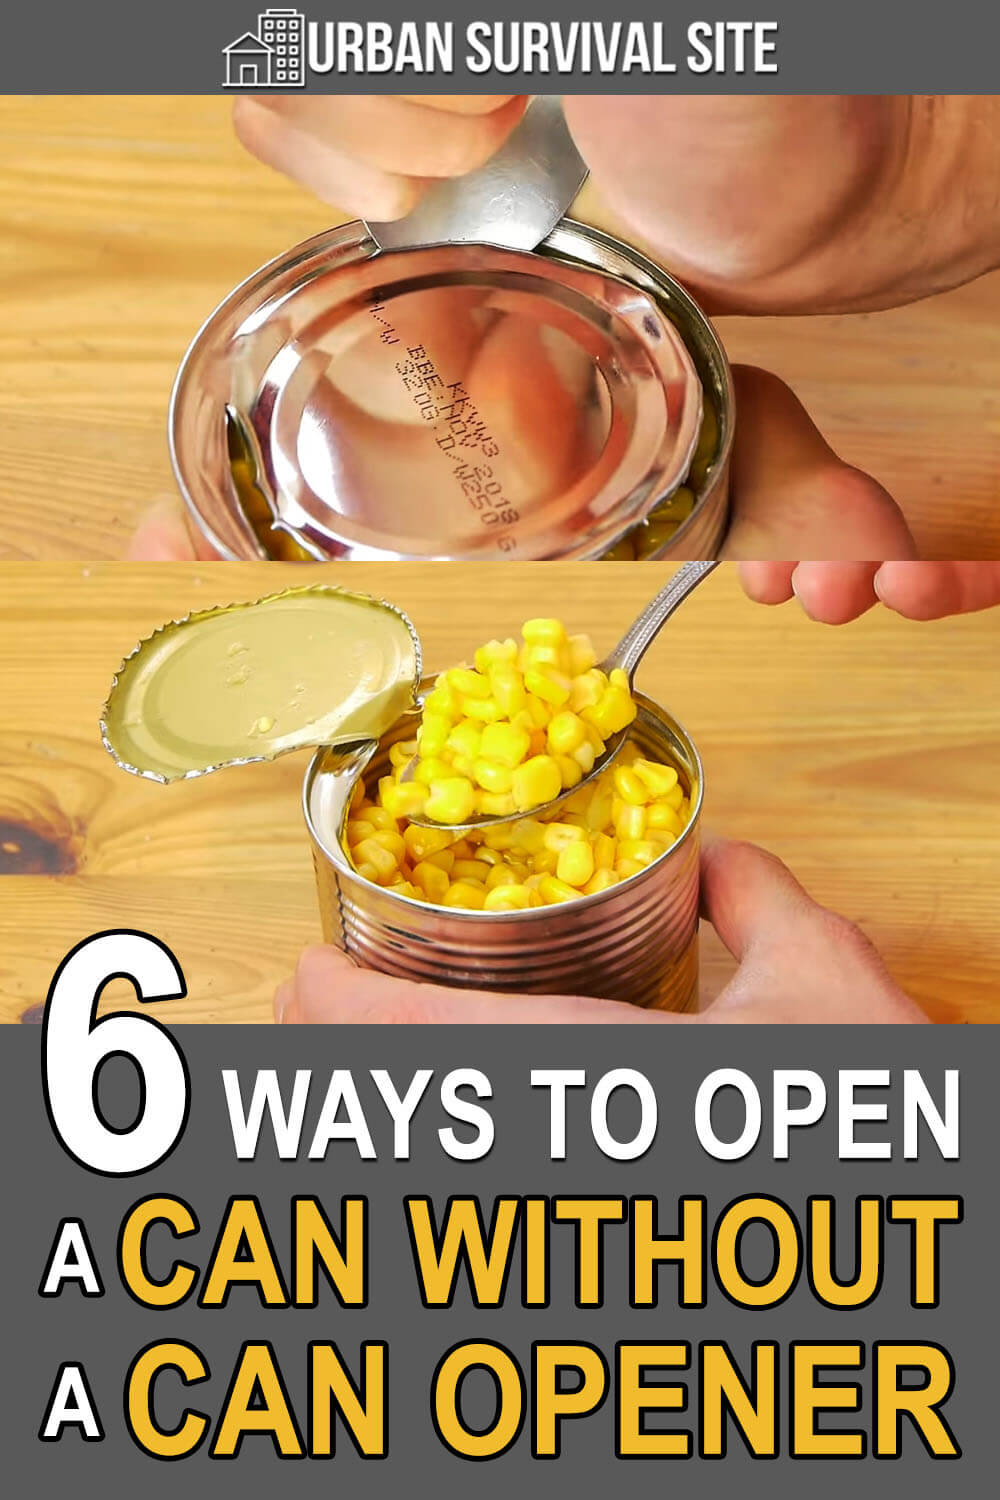 6 Ways to Open a Can Without a Can Opener